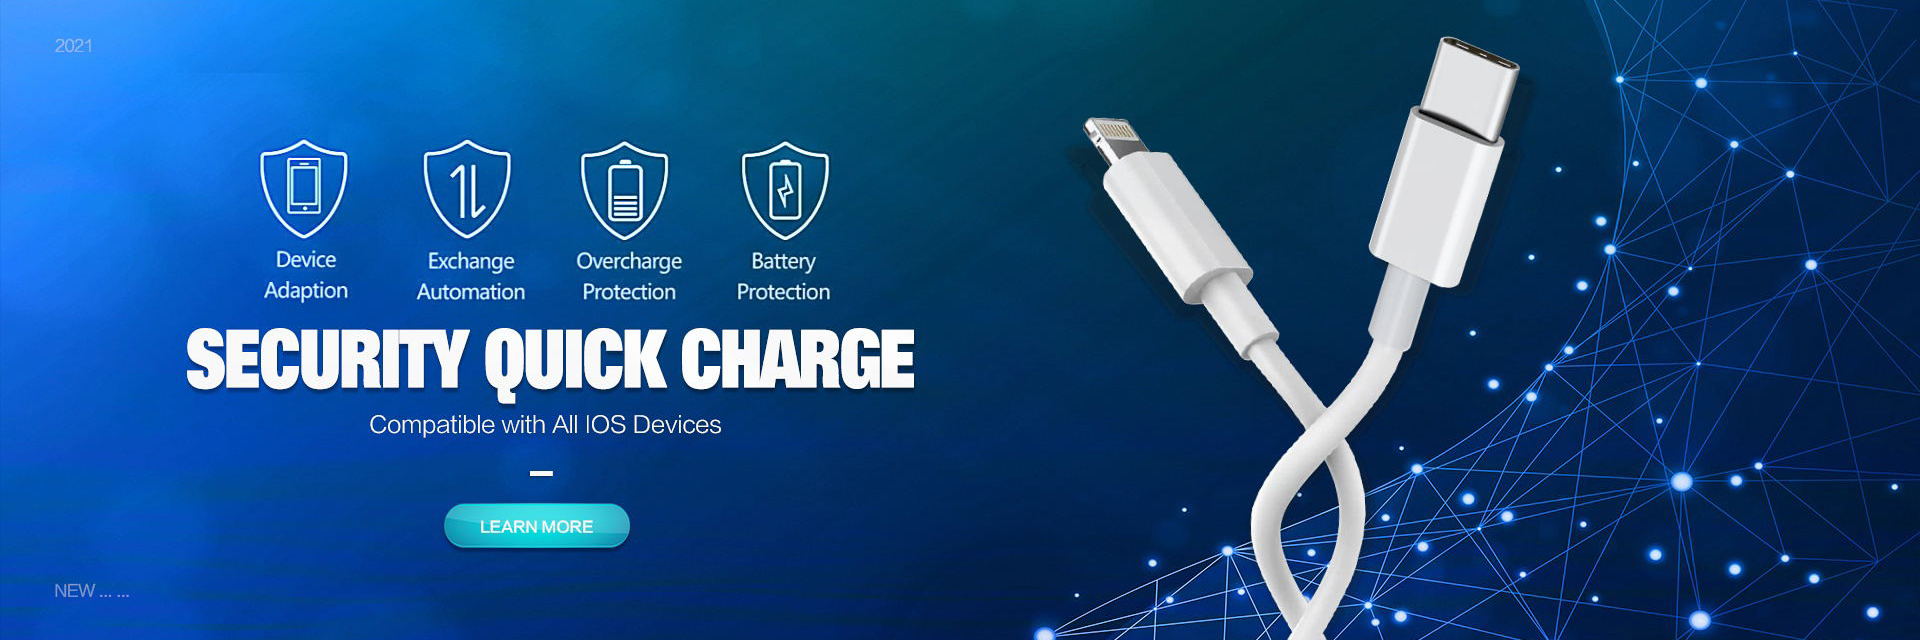 Security Quick Charge